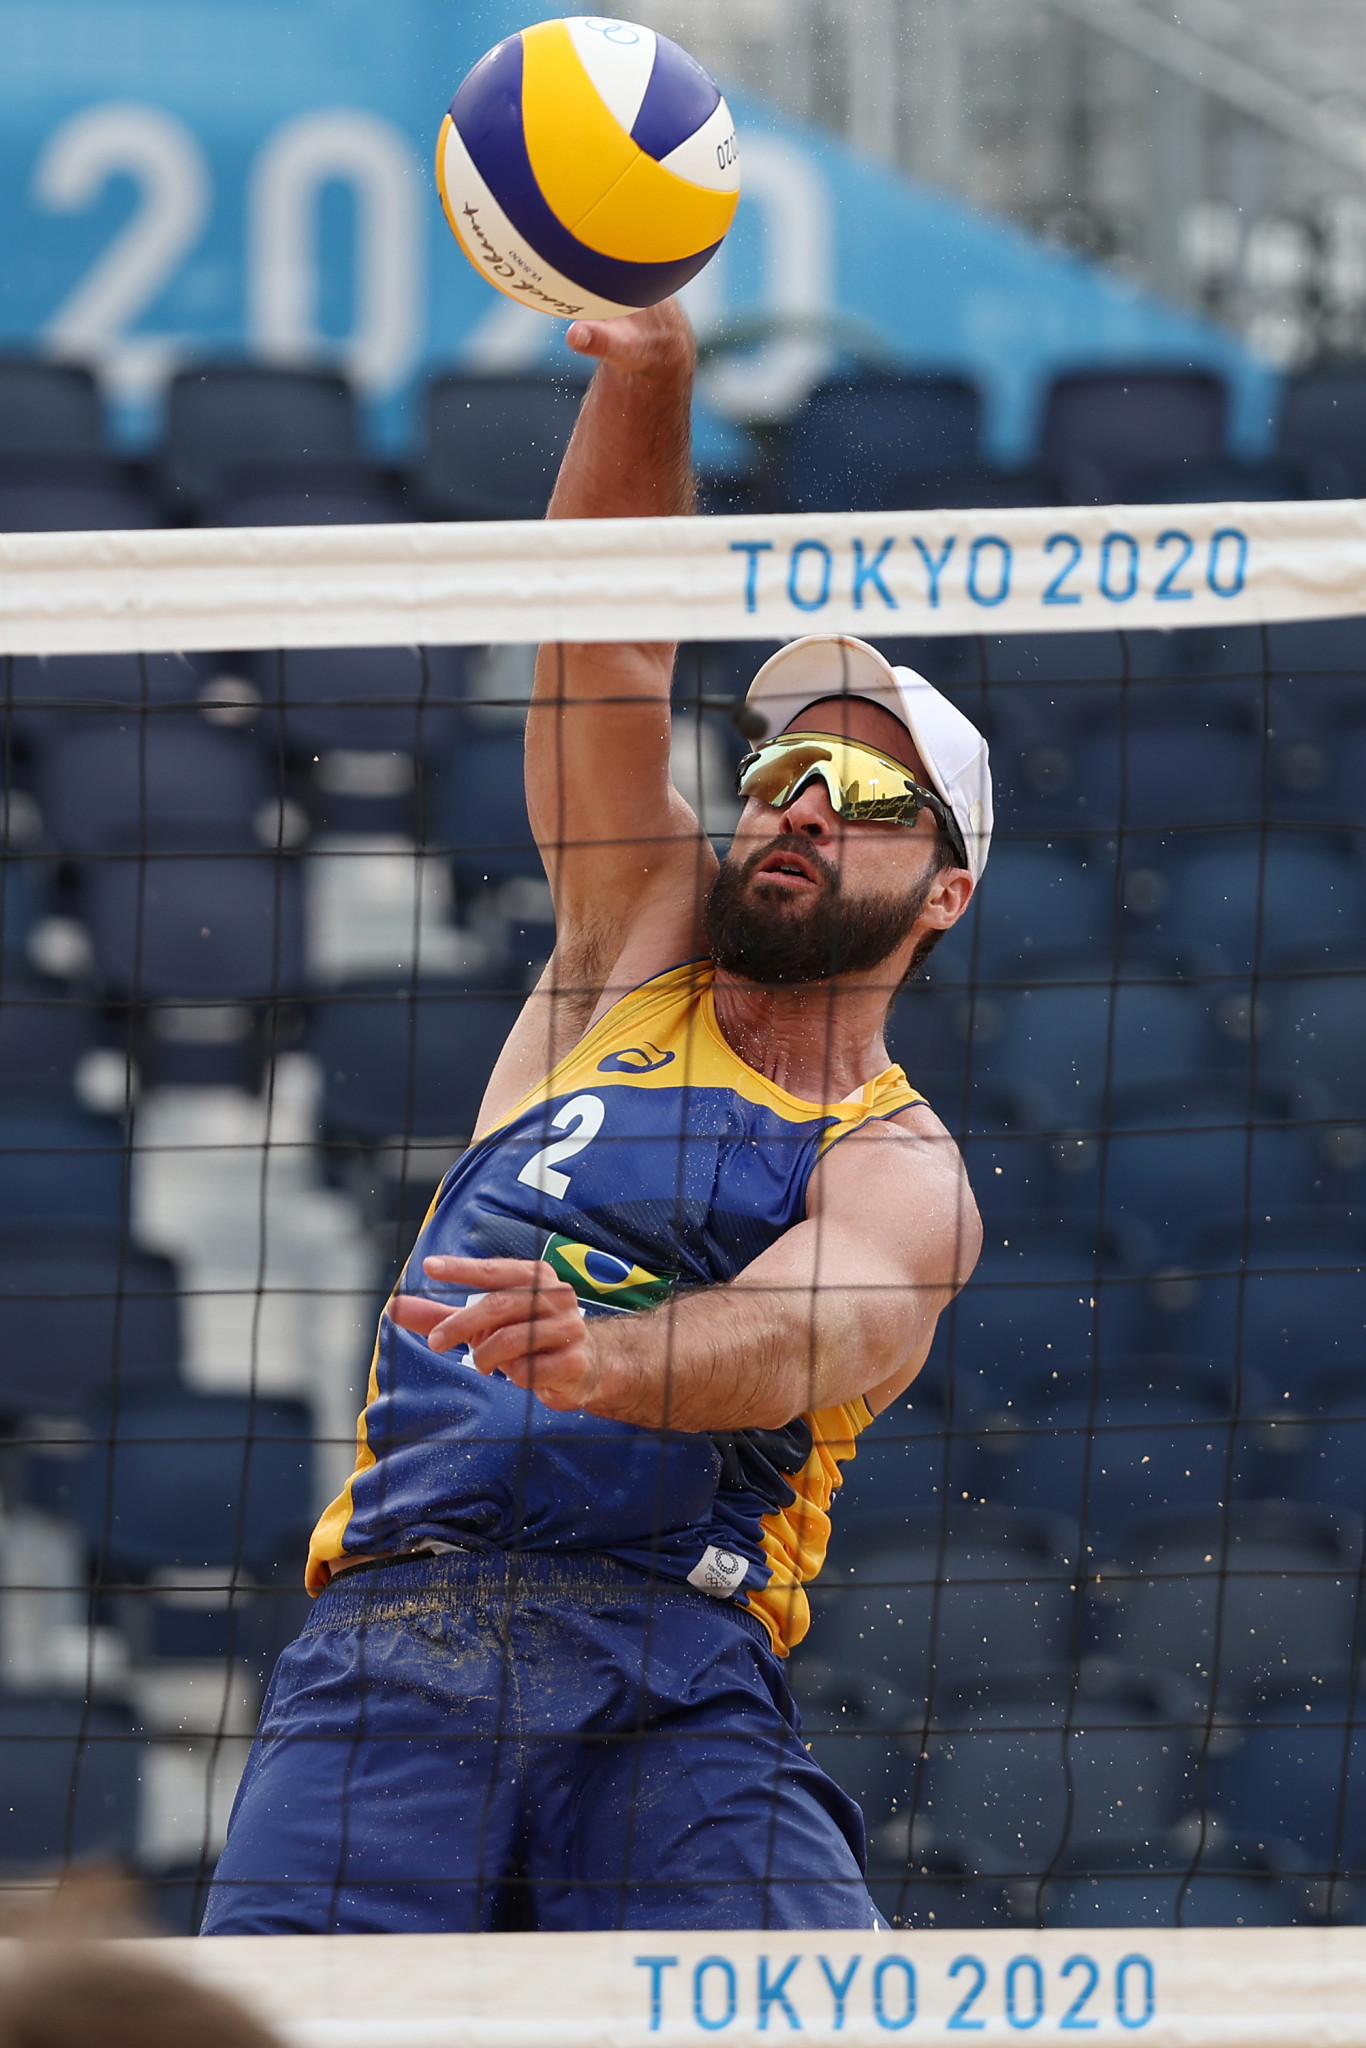 Bruno Schmidt competed for Brazil at Tokyo 2020, but lost in the round of 16 with Evandro Oliveira ©Getty Images